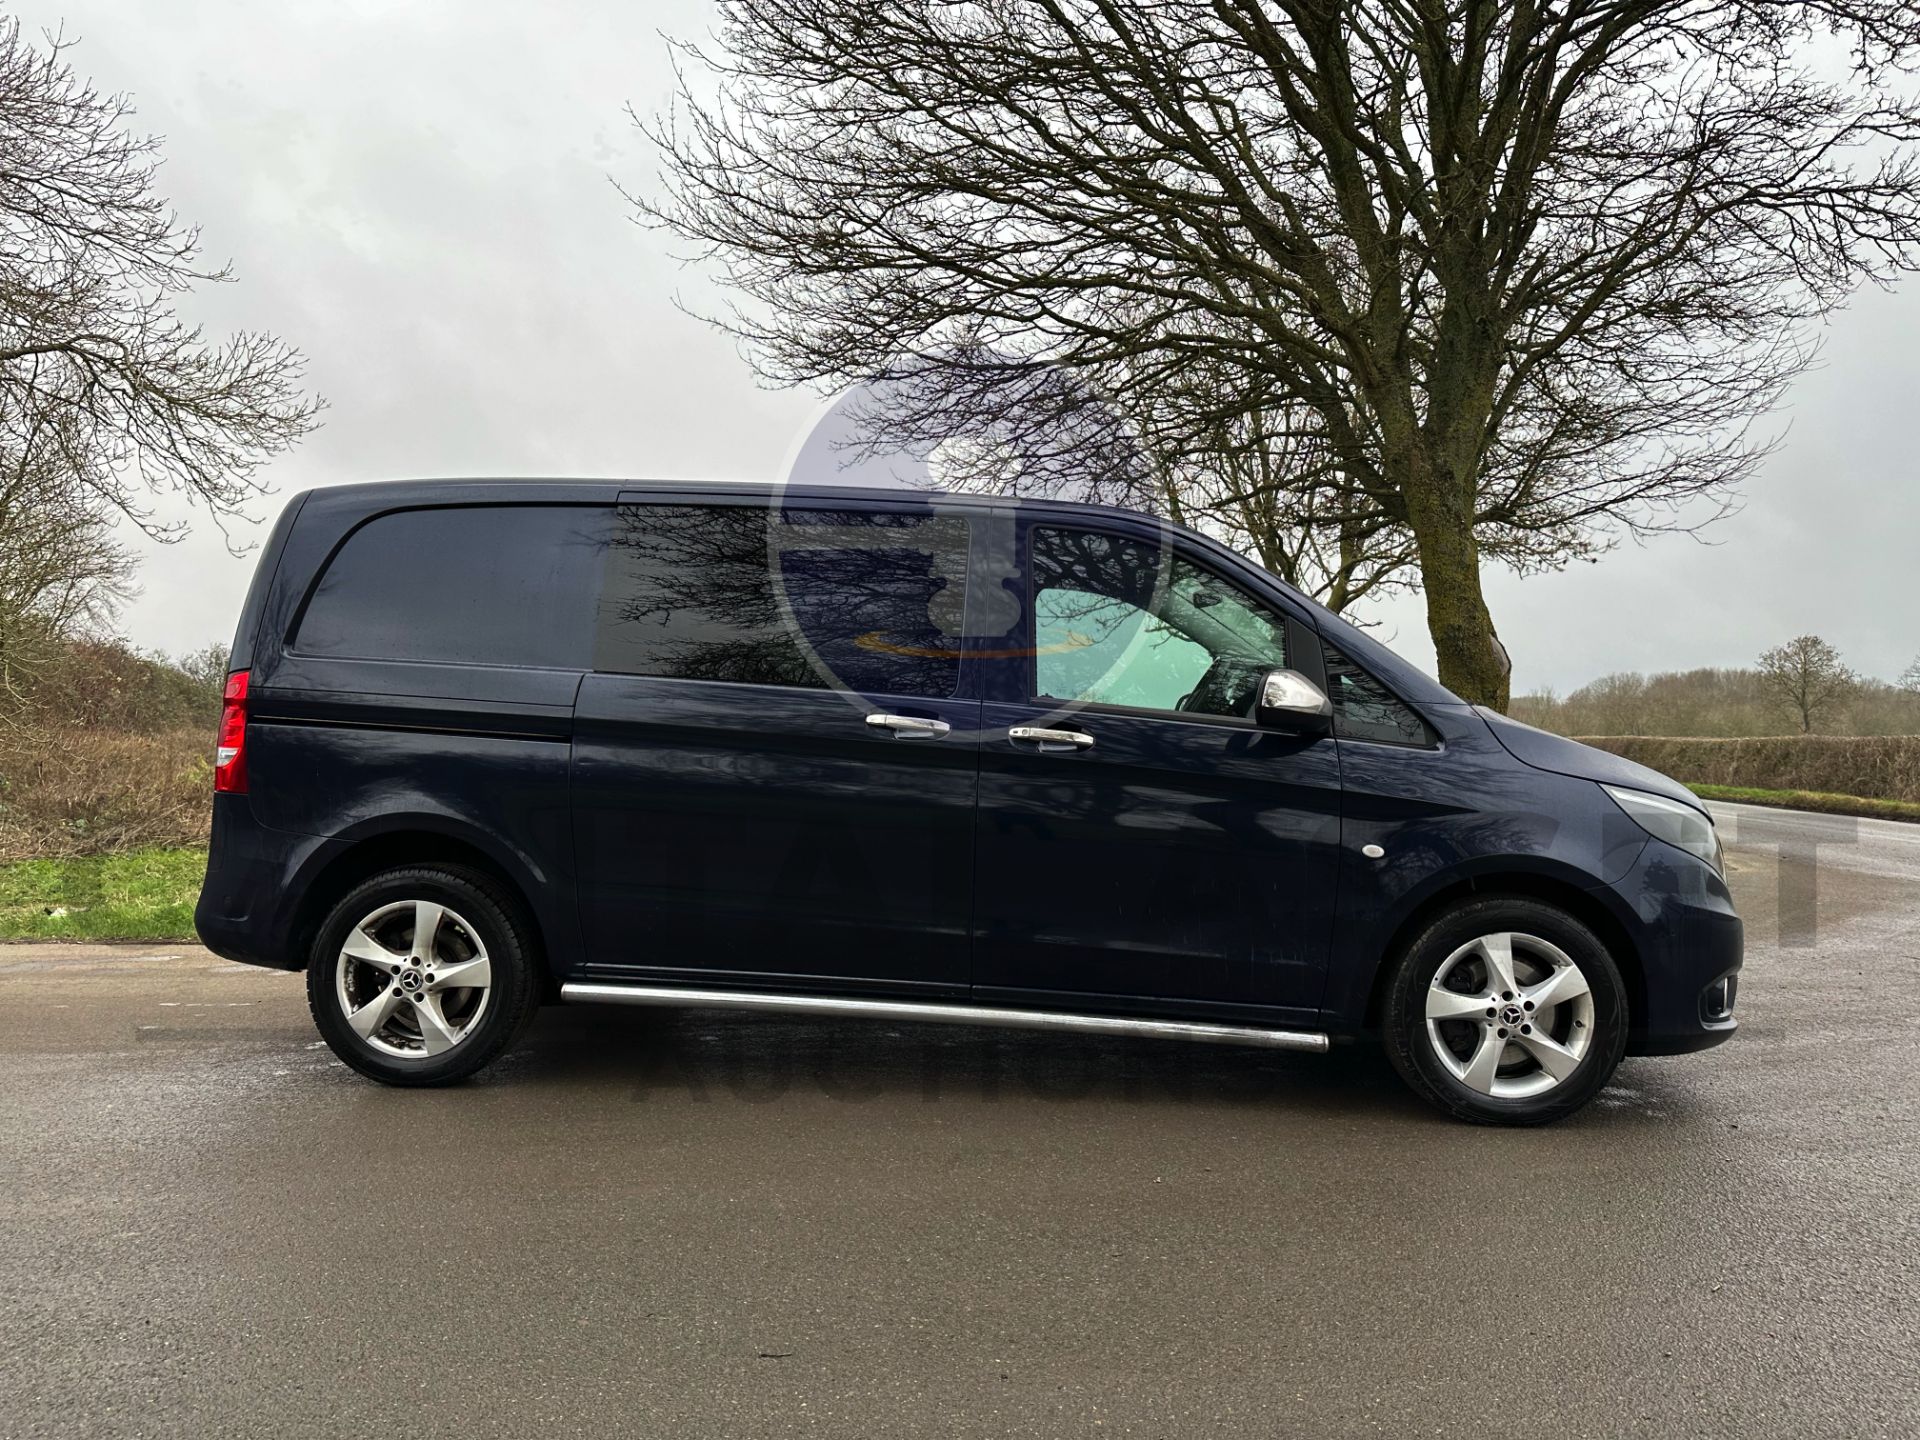 (ON SALE) MERCEDES-BENZ VITO 119 CDI AUTO *SWB - 5 SEATER DUALINER* (2019 - EURO 6) *SPORT EDITION* - Image 14 of 44